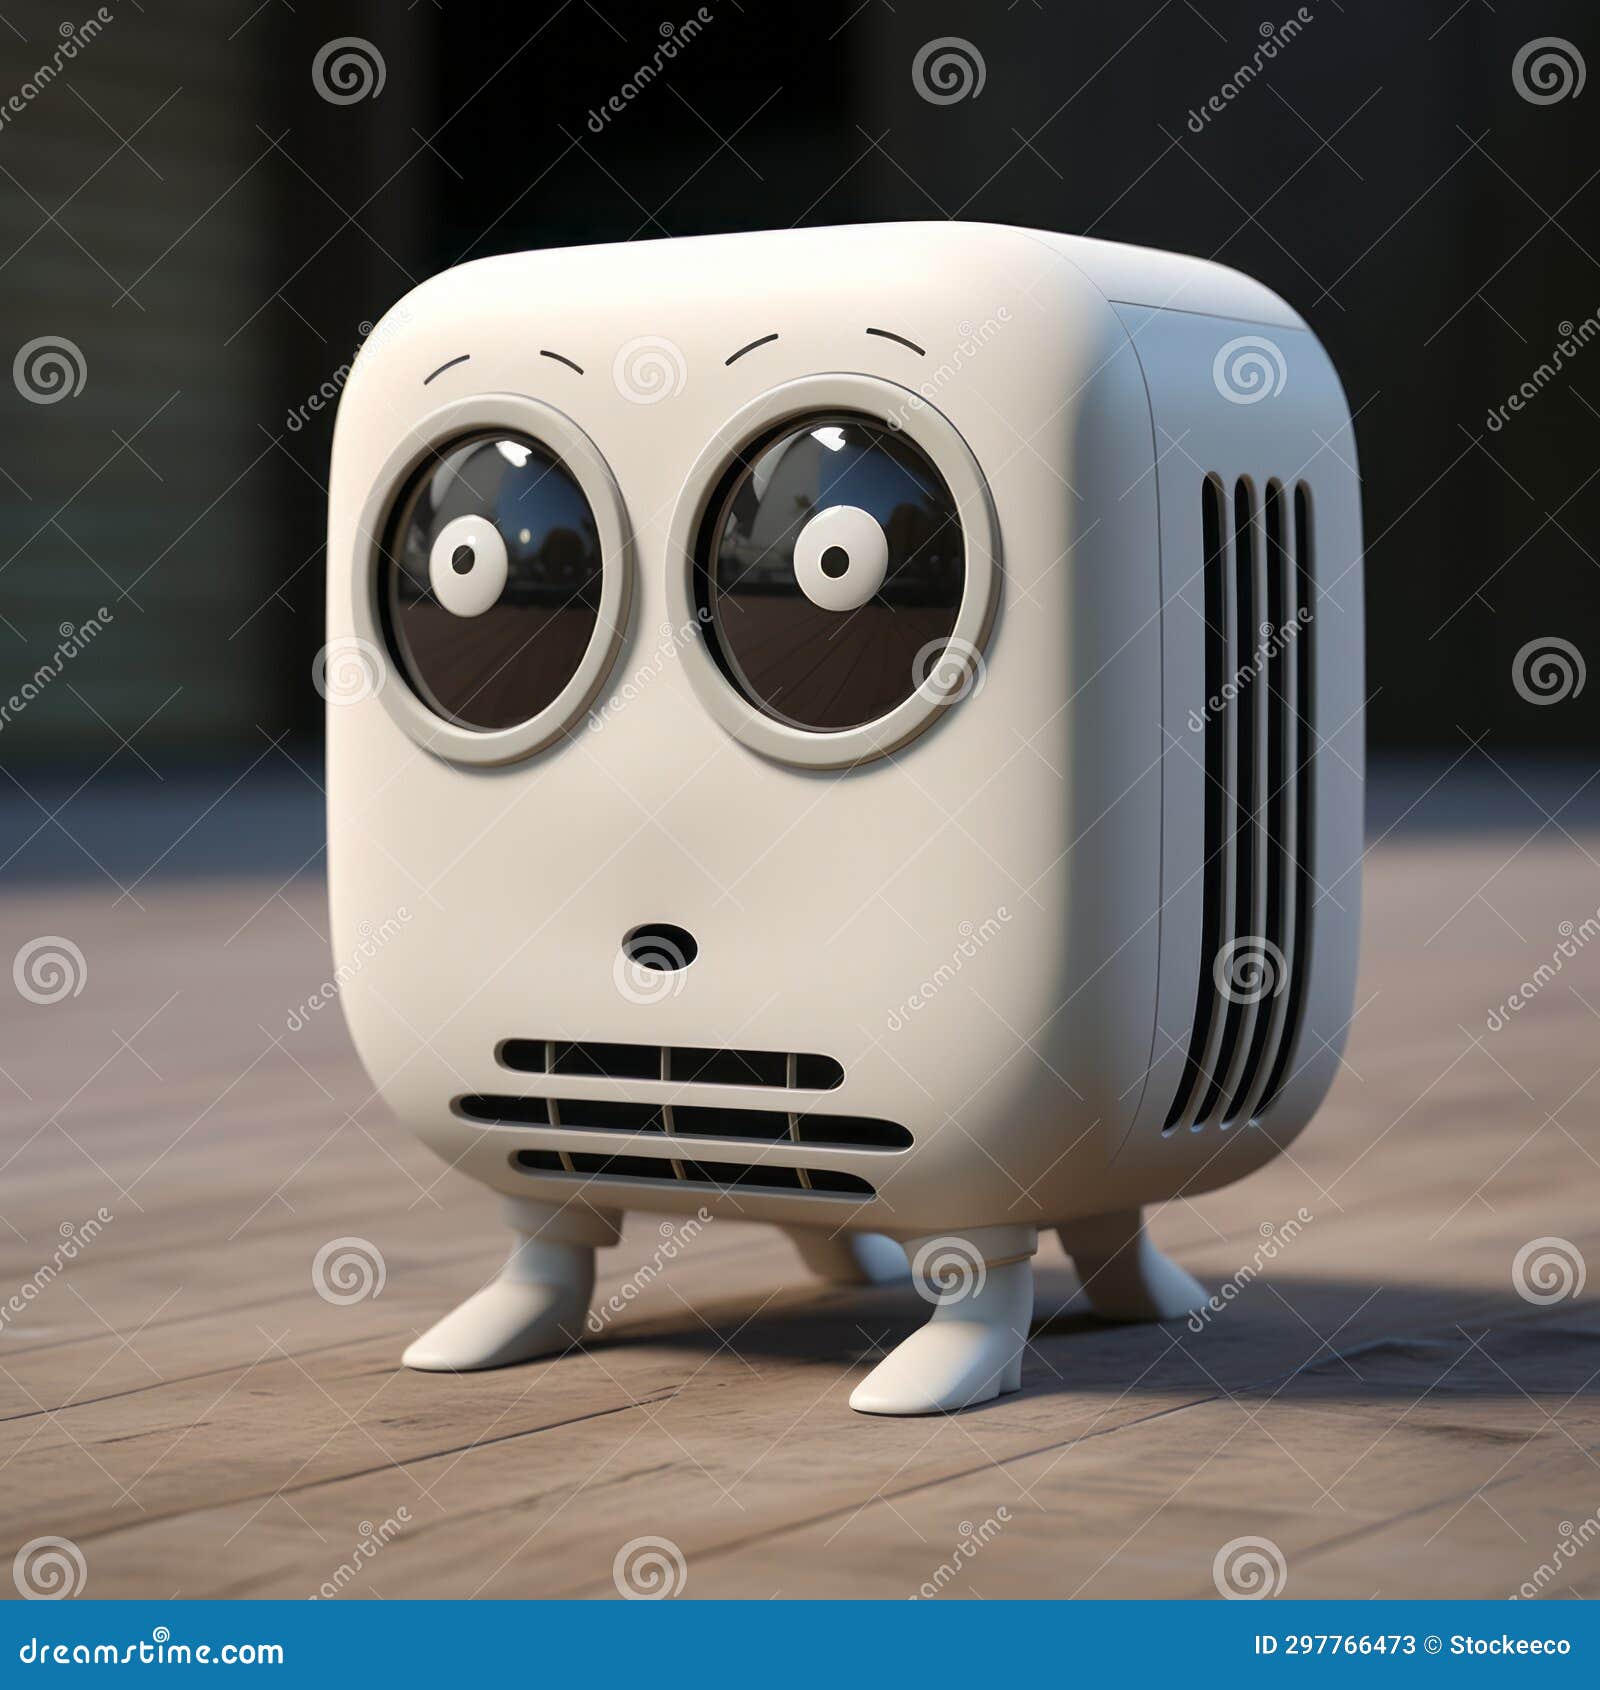 cute little white toy with big eyes: a quirky cubo-futuristic caricature